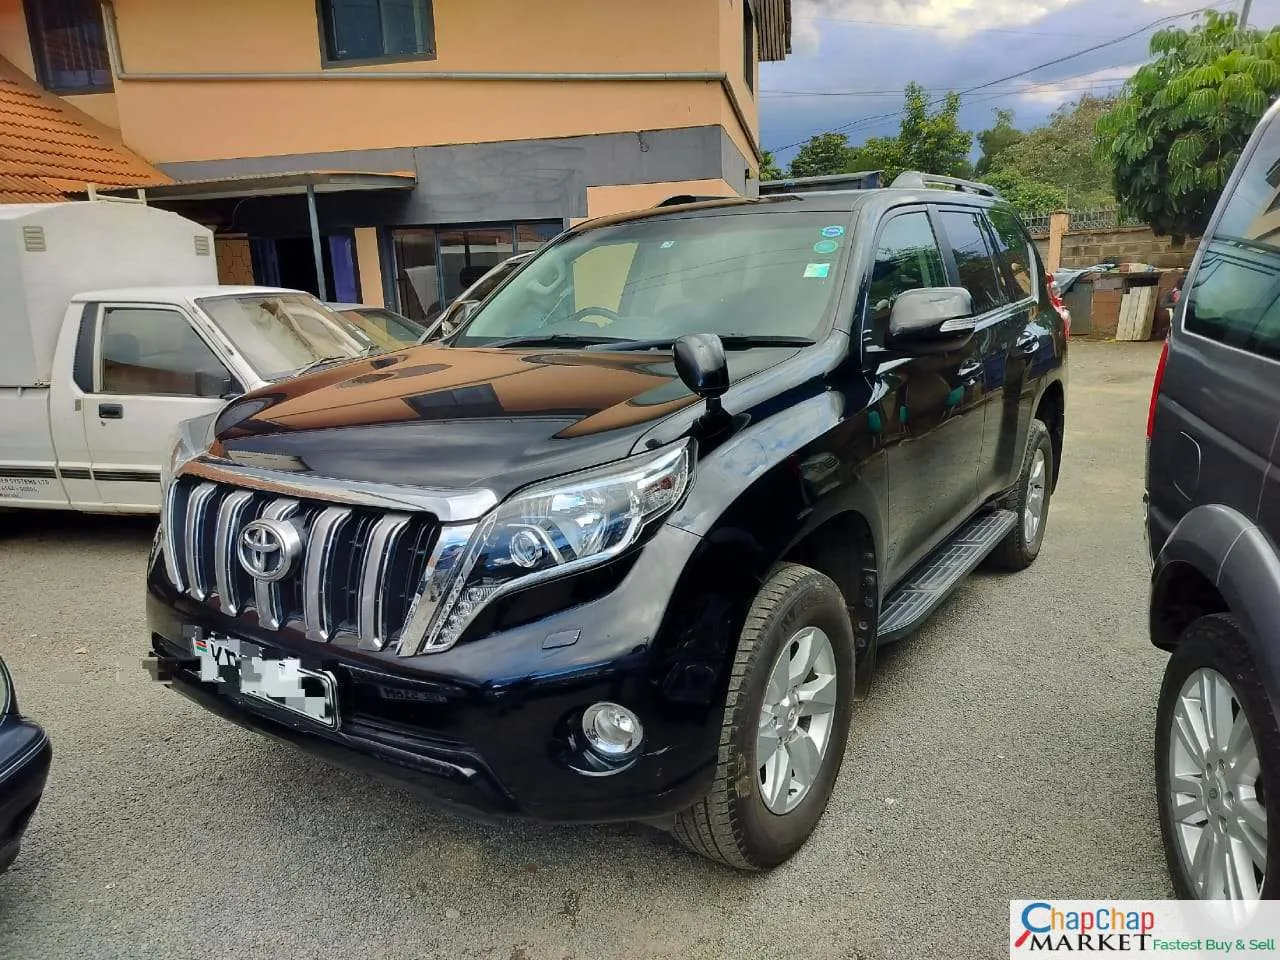 Toyota PRADO for sale in Kenya Sunroof Quick SALE TRADE IN OK EXCLUSIVE! Hire purchase installments 2017